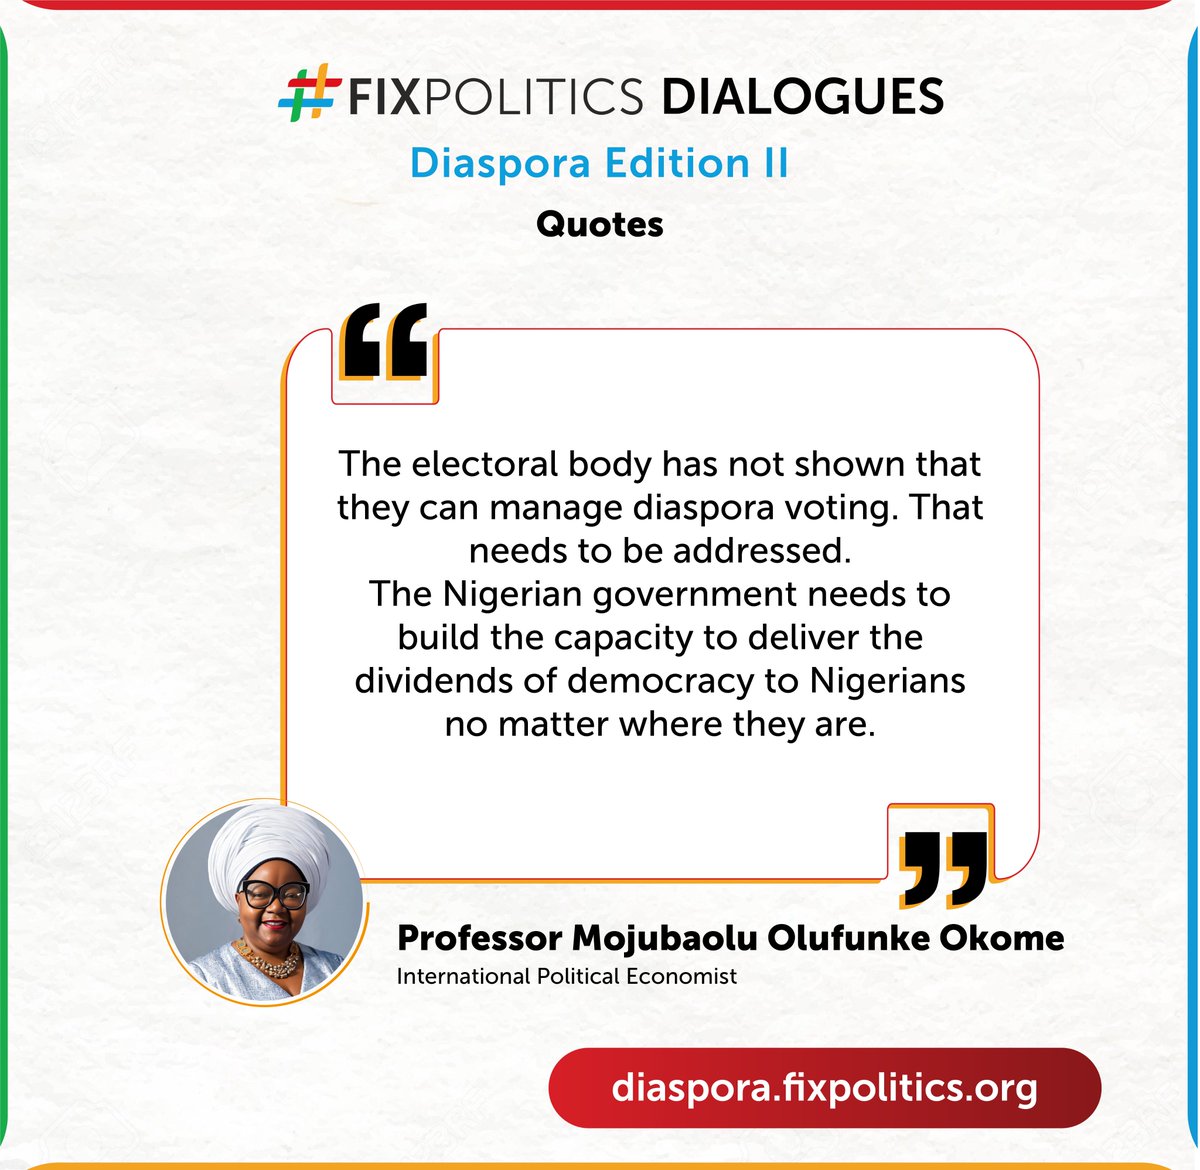 'The Nigerian government needs to build the capacity to deliver the dividends of democracy to Nigerians no matter where they are' - @mojubaolu at the #FixPolitics Diaspora Dialogue II. Watch this space for the next edition.